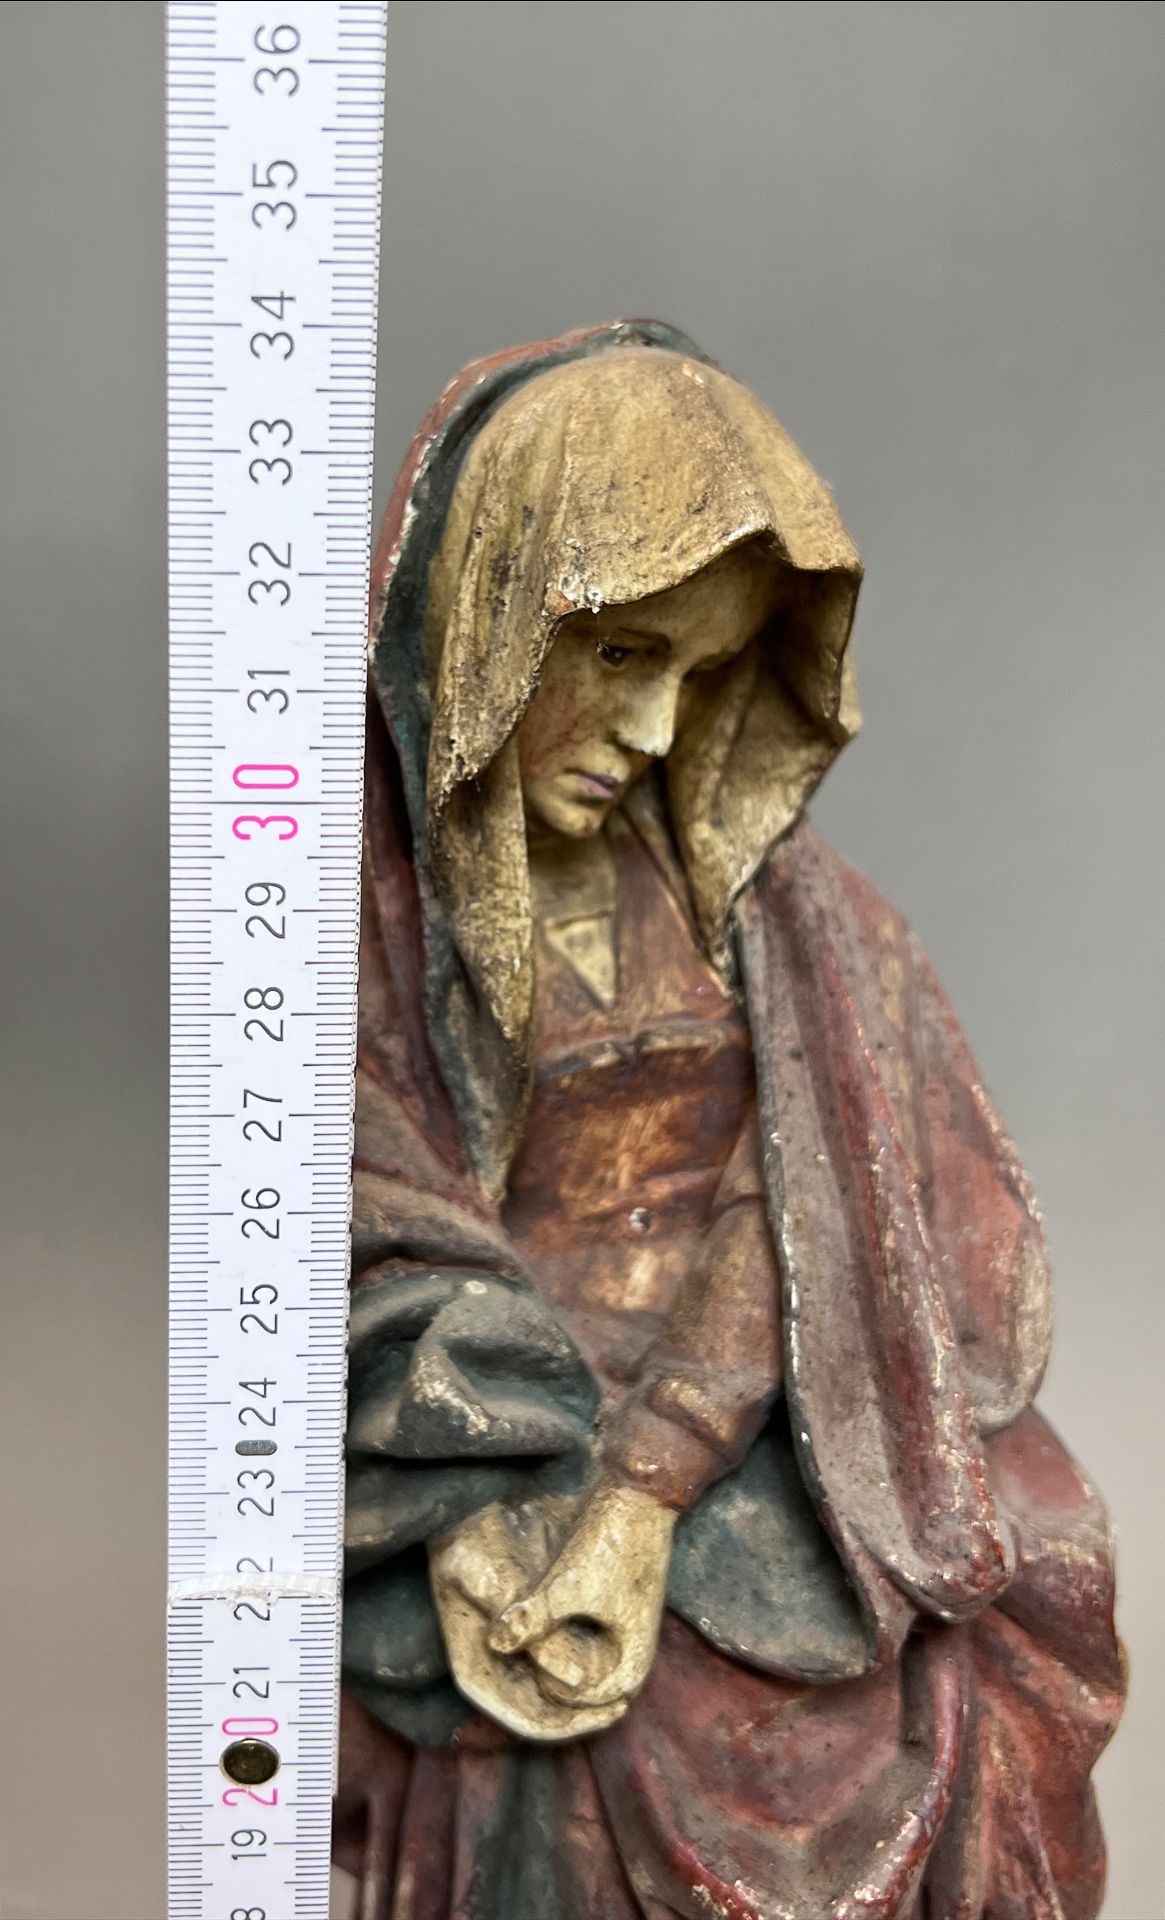 Altarpiece. Lamenting woman. Around 1700. South Germany. - Image 9 of 9